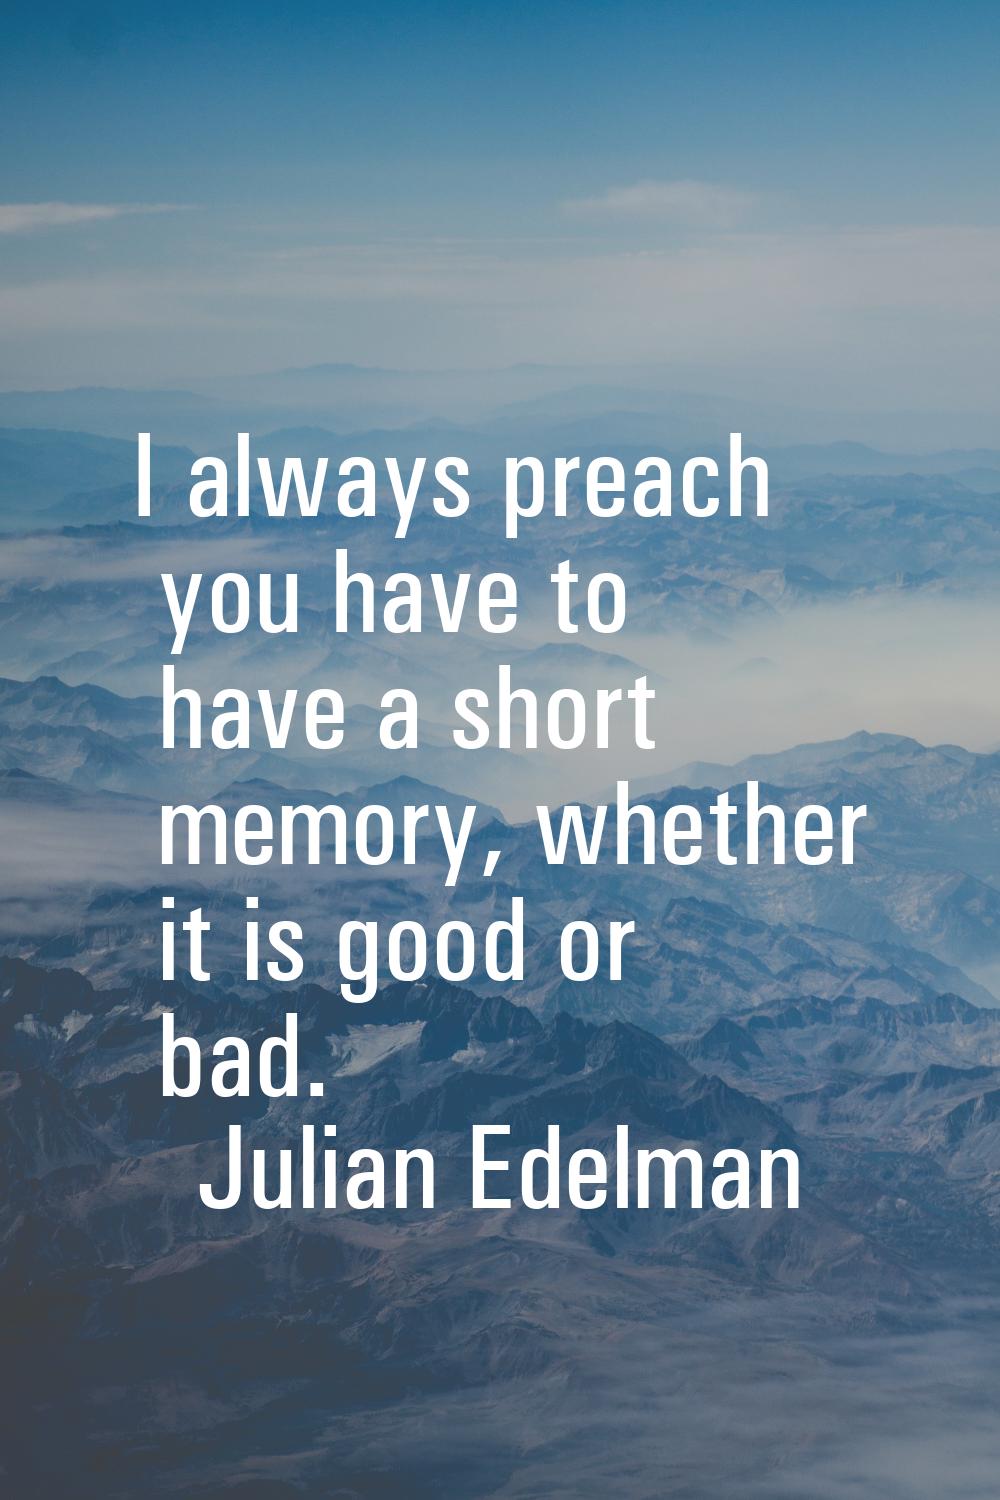 I always preach you have to have a short memory, whether it is good or bad.